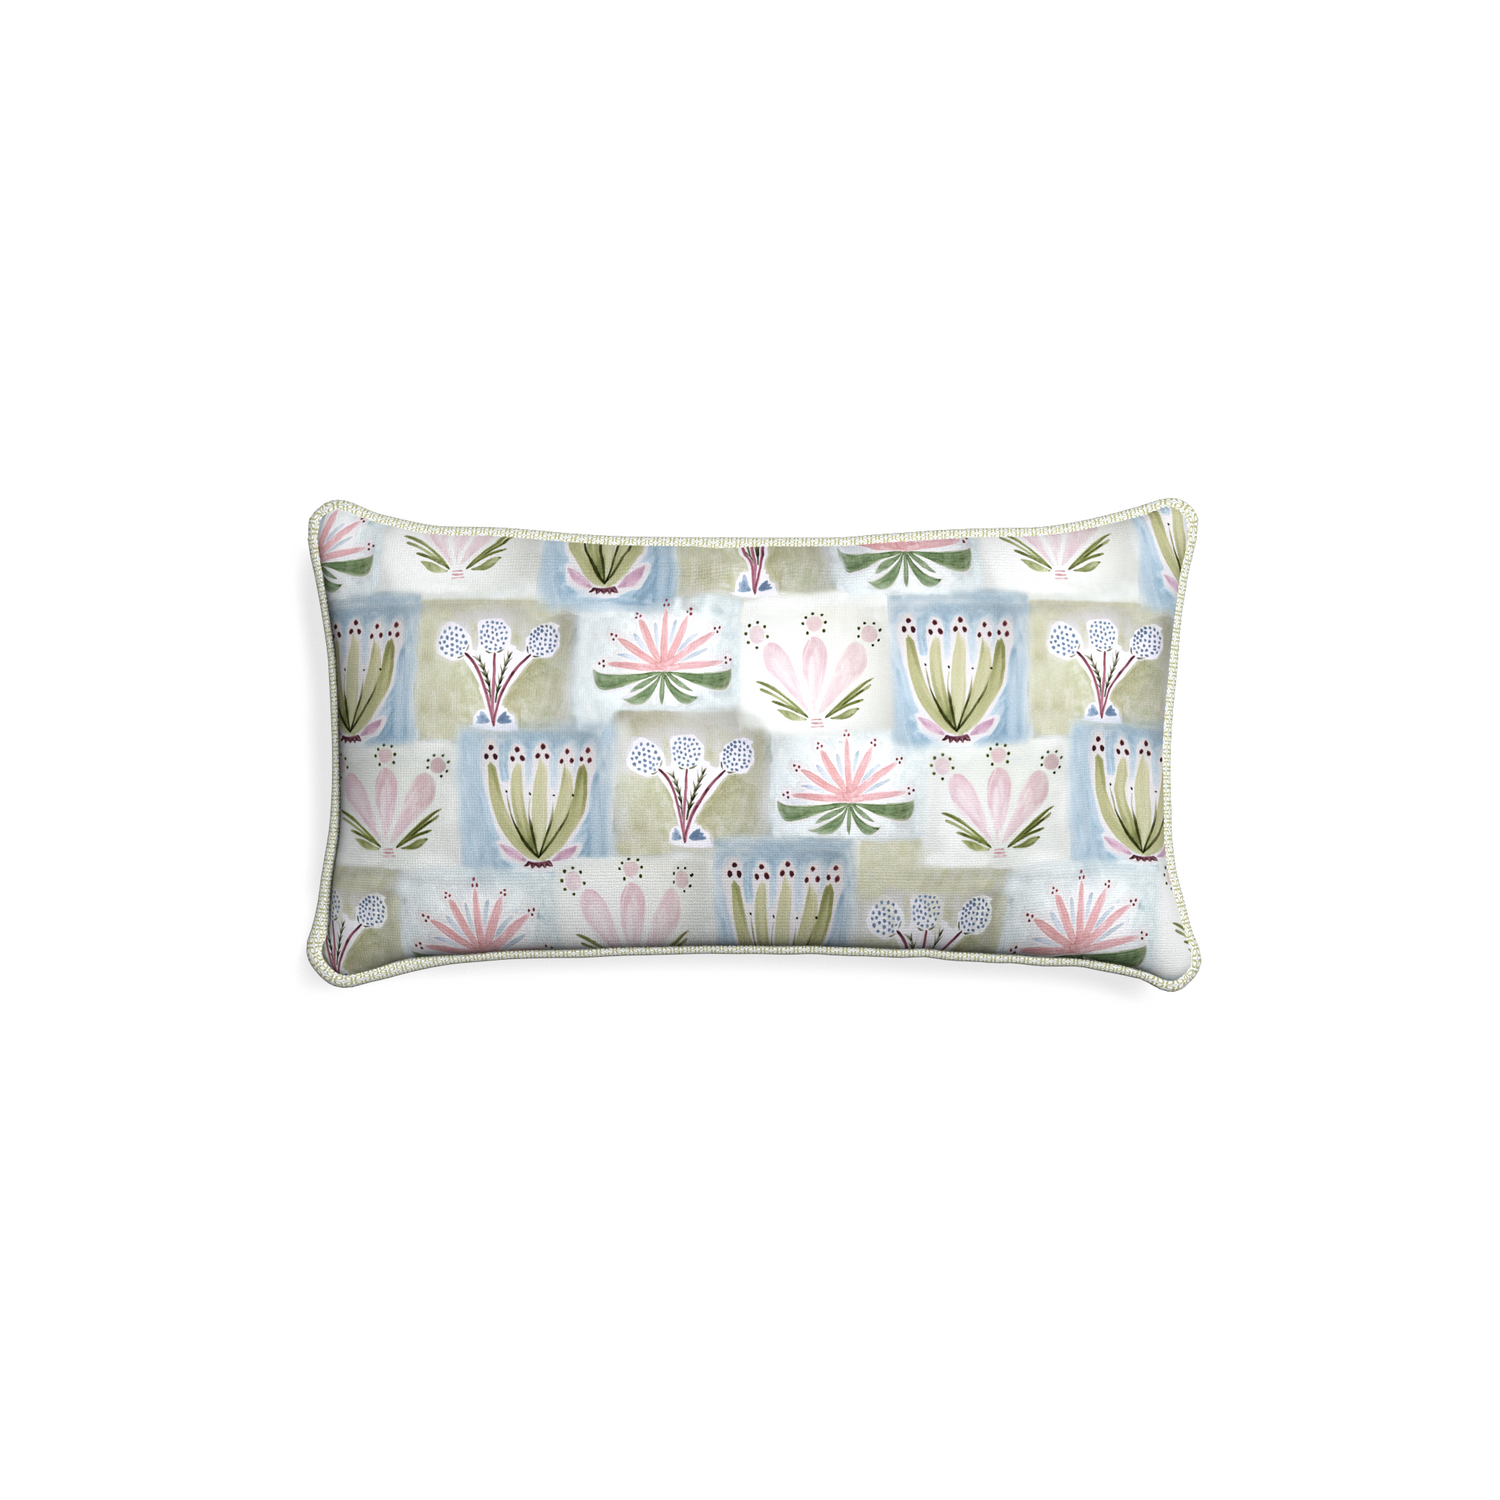 Petite-lumbar harper custom hand-painted floralpillow with l piping on white background